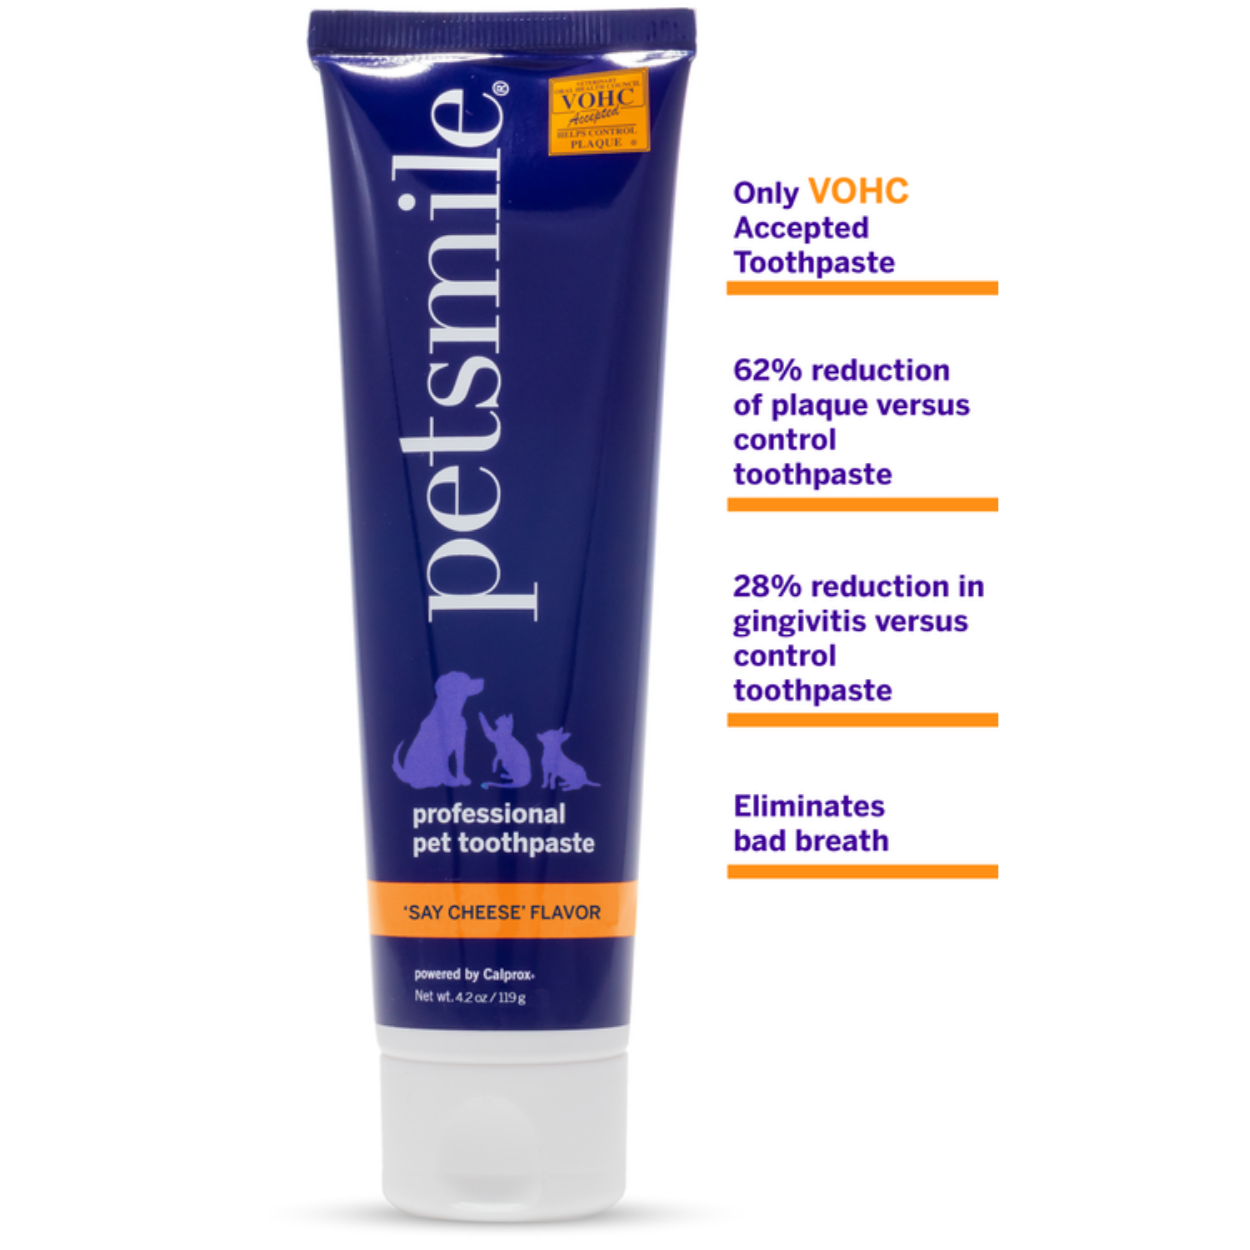 Petsmile Professional Toothpaste For Dog and Cat --Say Cheese Flavor 4.2 Oz